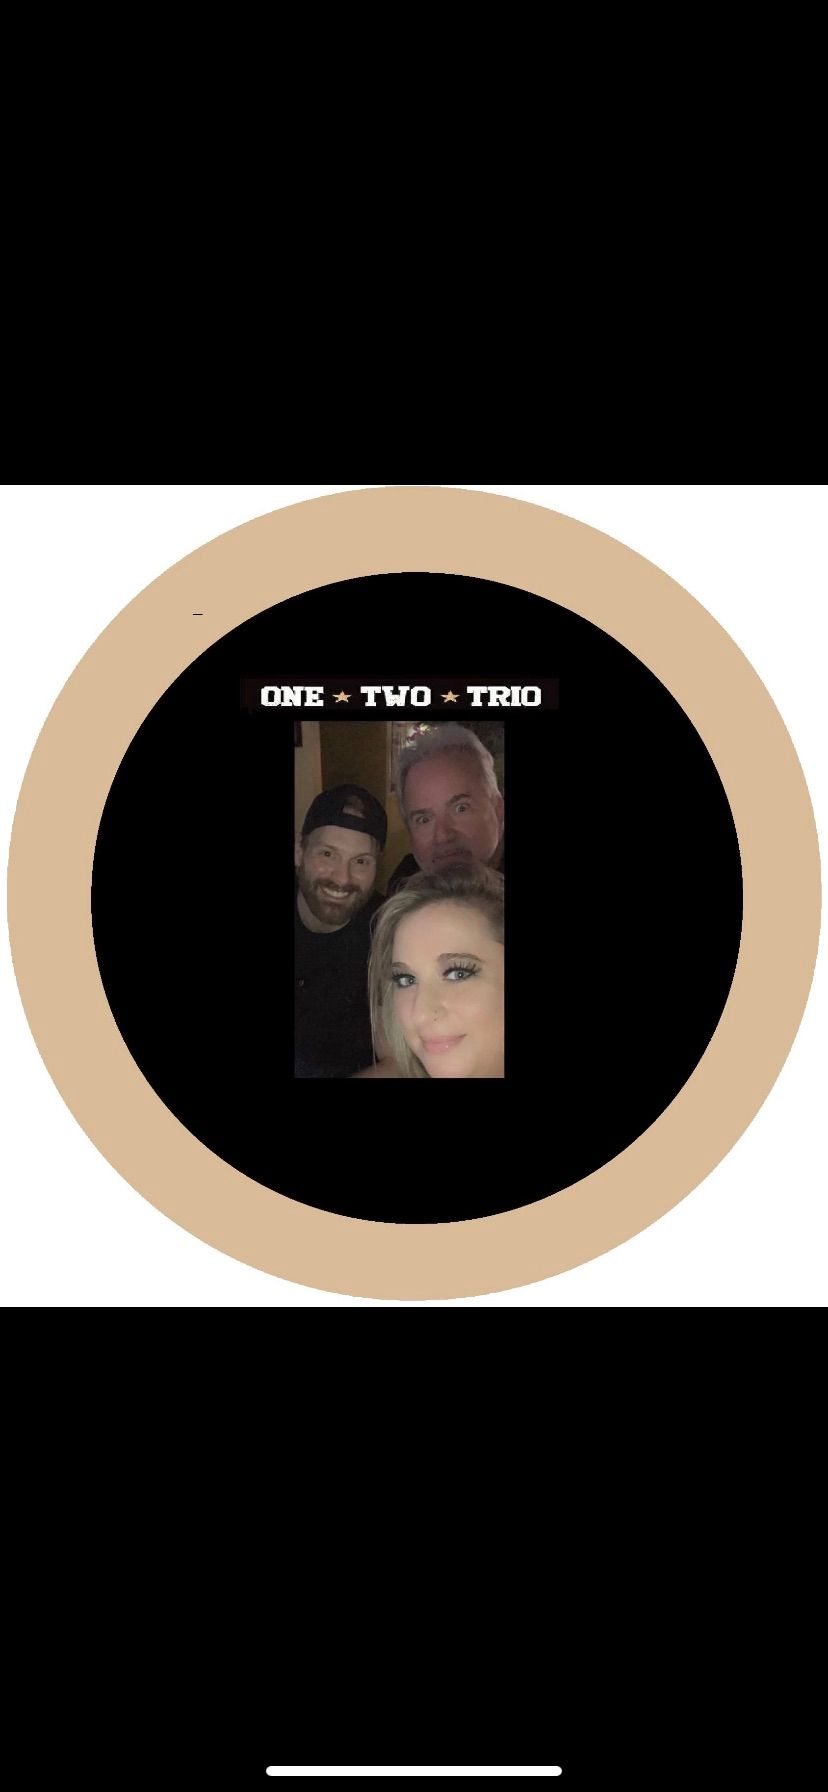 One-Two-Trio at The Pink Elephant